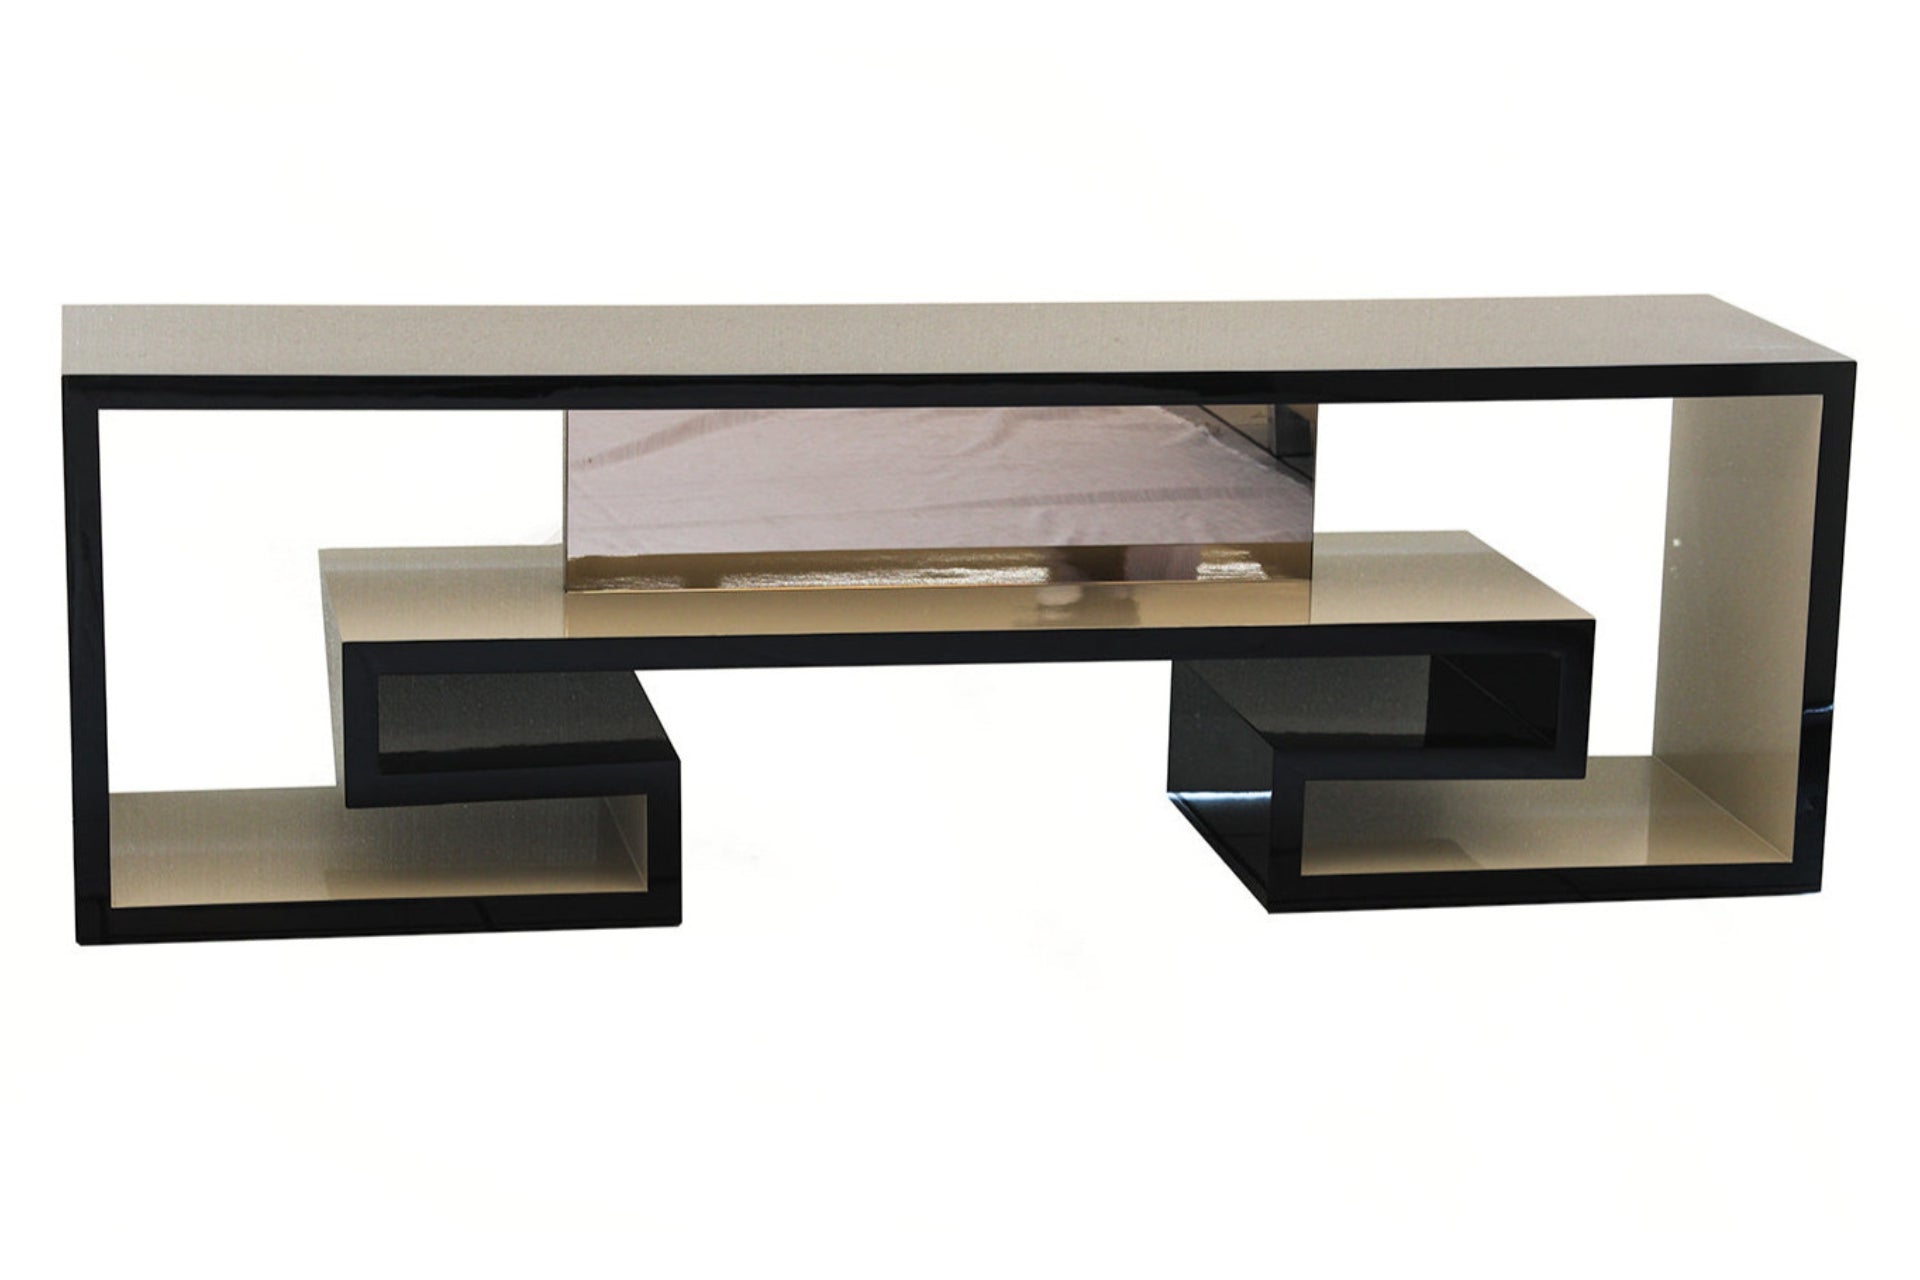 The Sublime side table can be used as a TV stand. Finished in black and gold gloss wood.